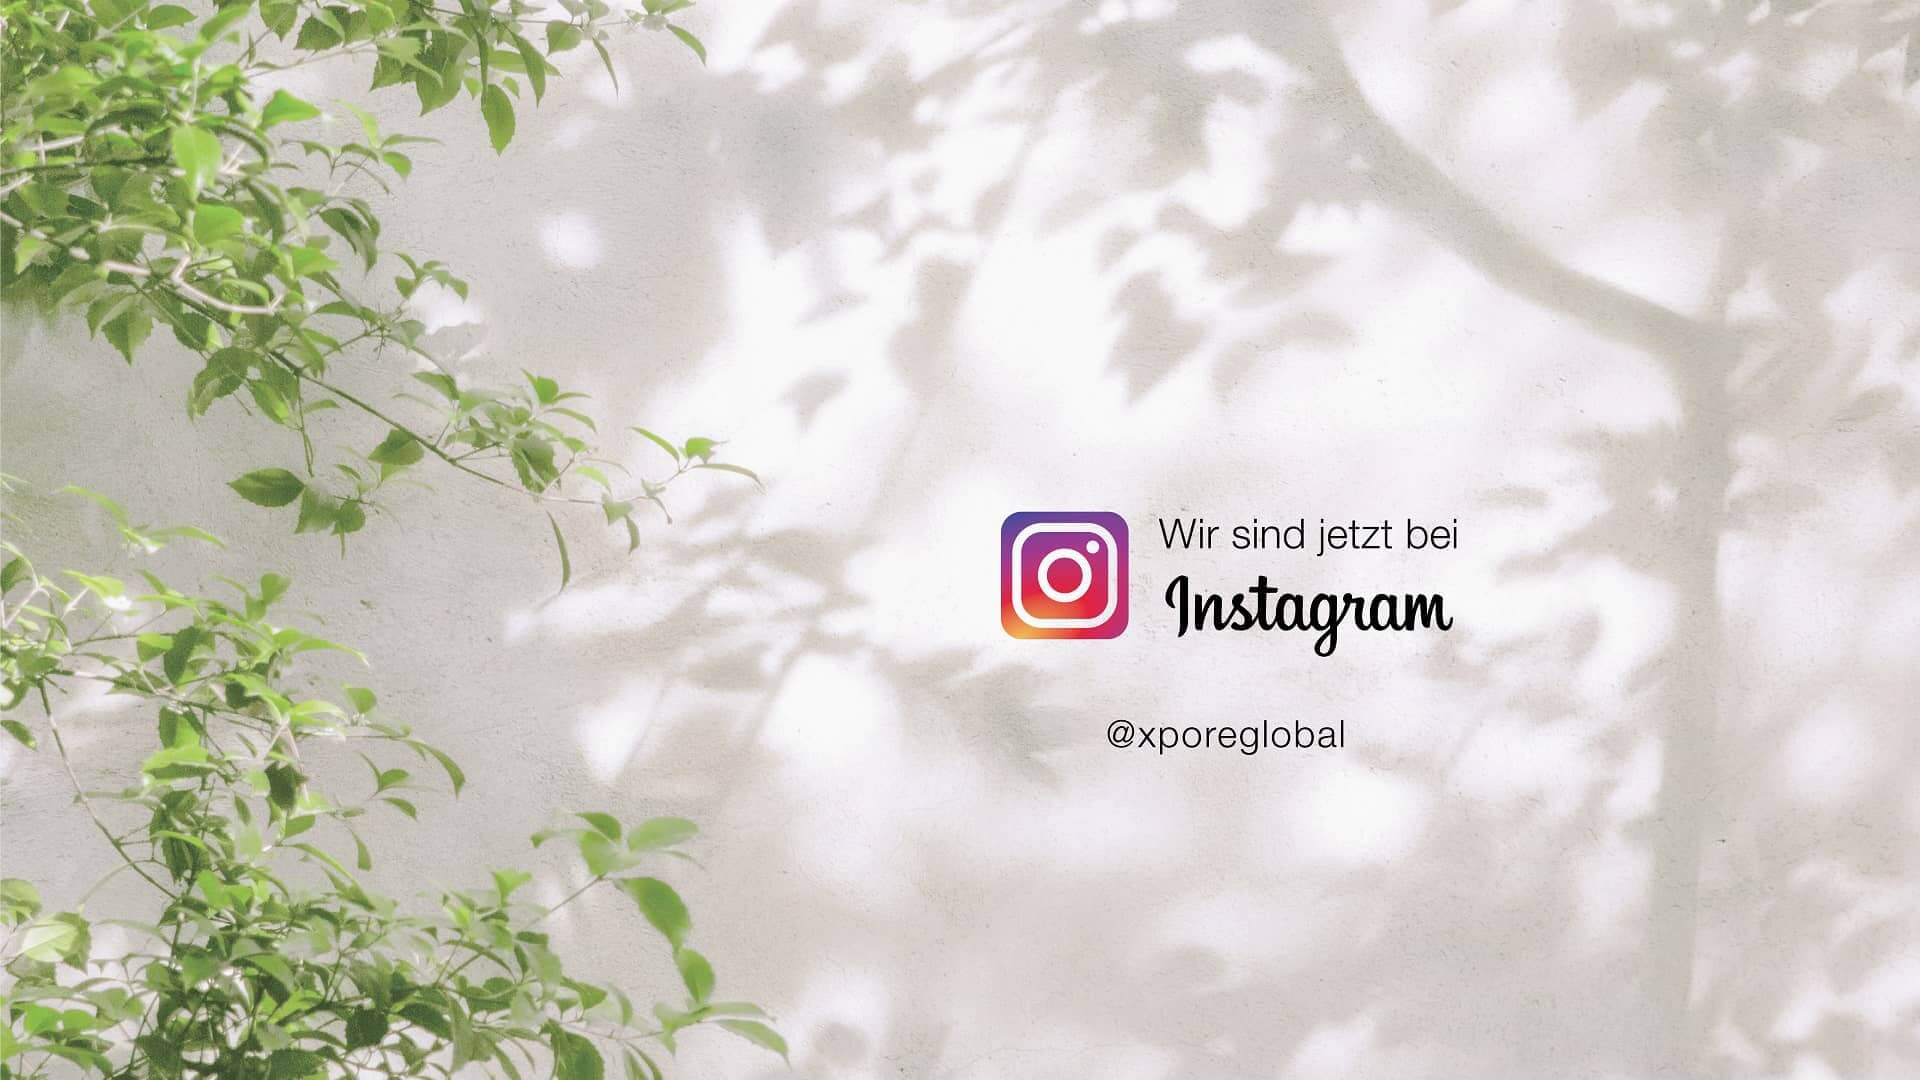 We’ve Launched Our Instagram